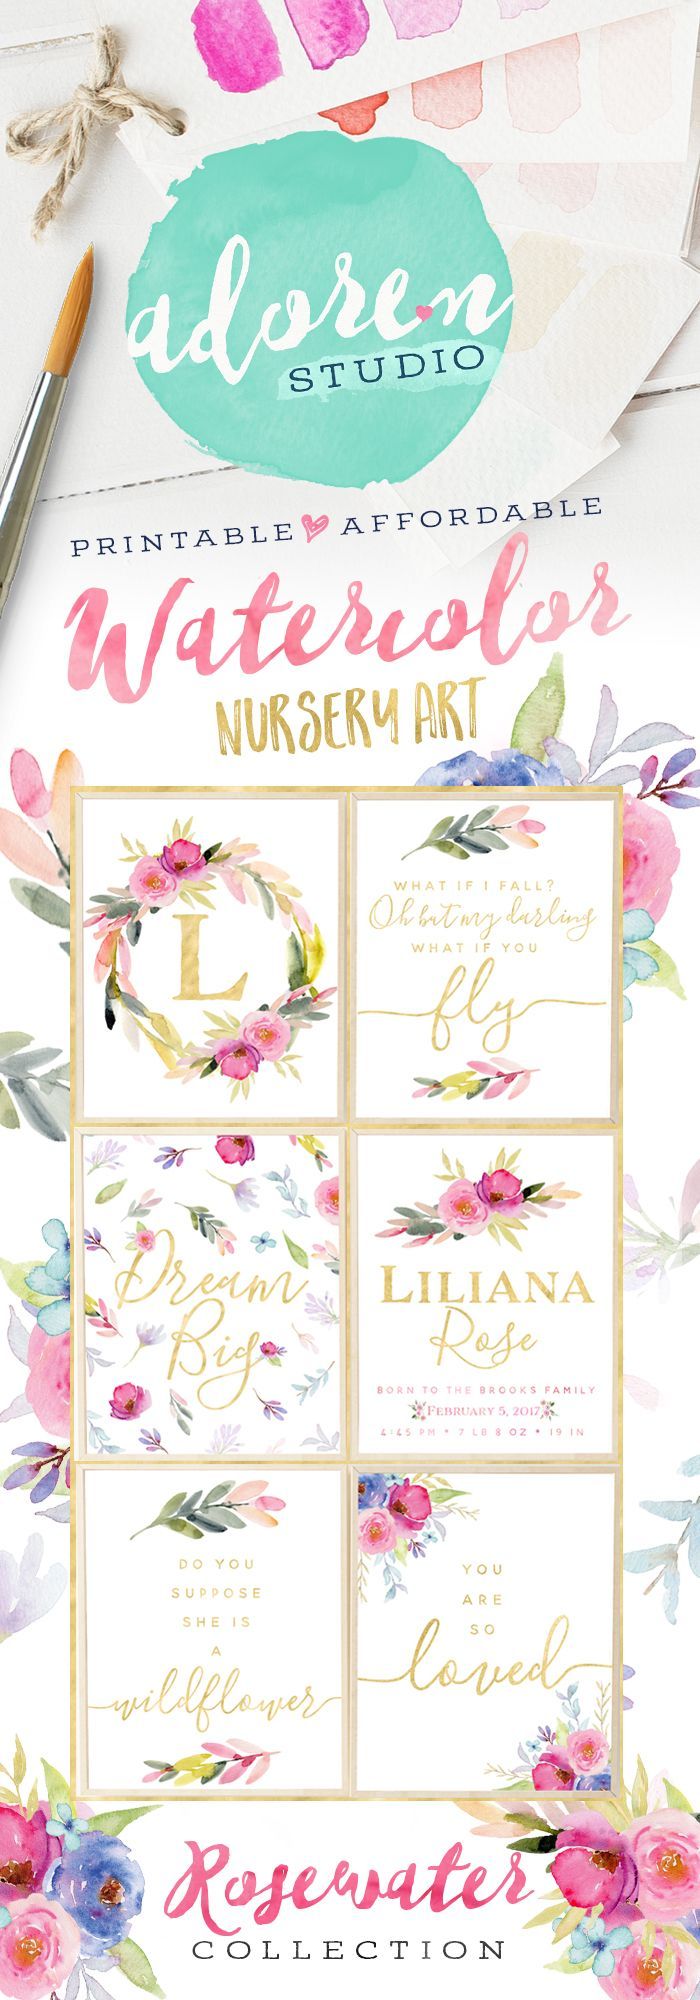 Beautiful watercolor nursery printables and prints from Adoren Studio!  Watercolor and Florals are major trends in nursery decor –